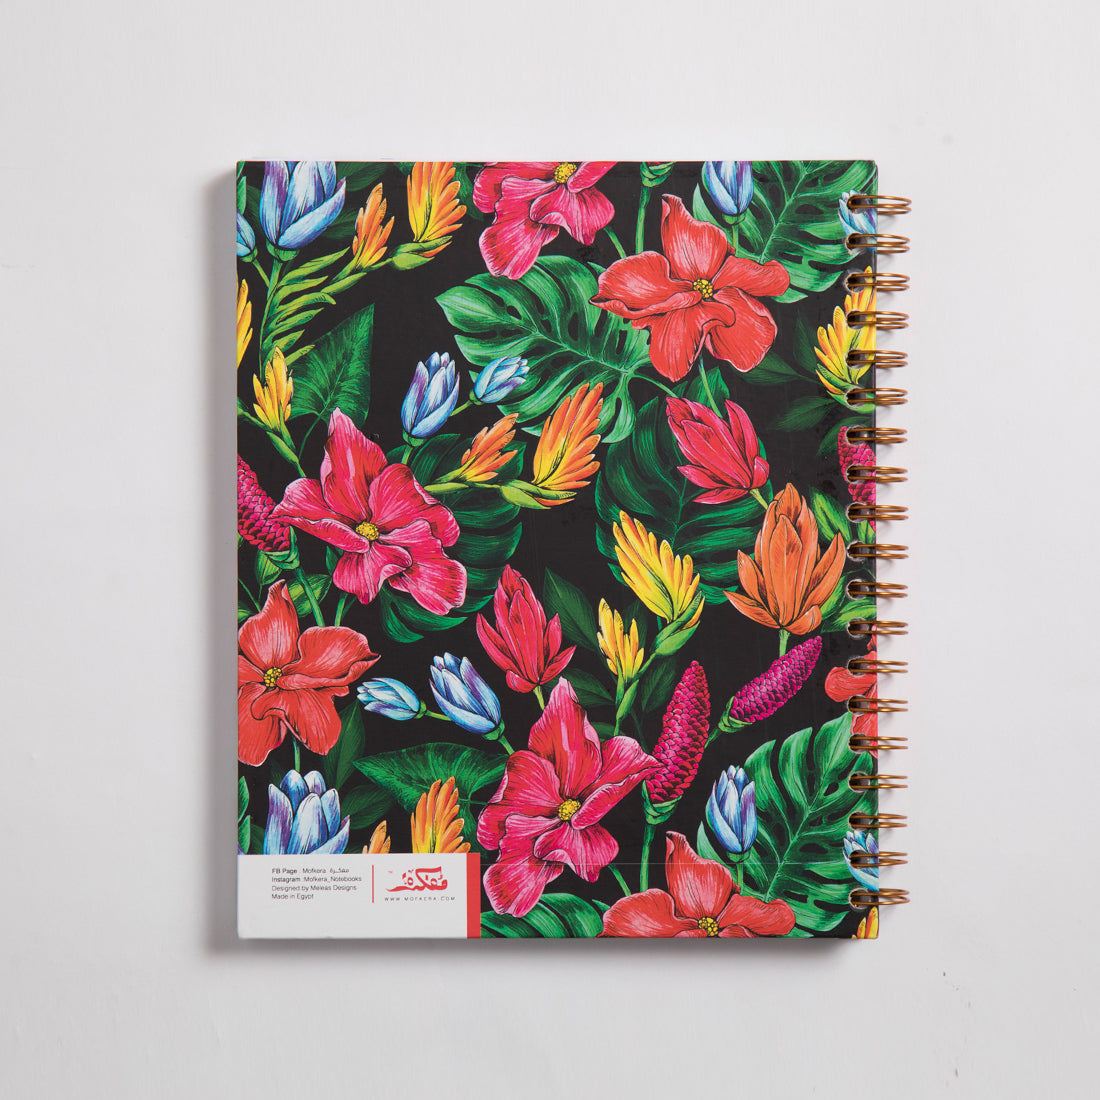 Floral (AlAlb) Notebook A4 Size -3 Subjects